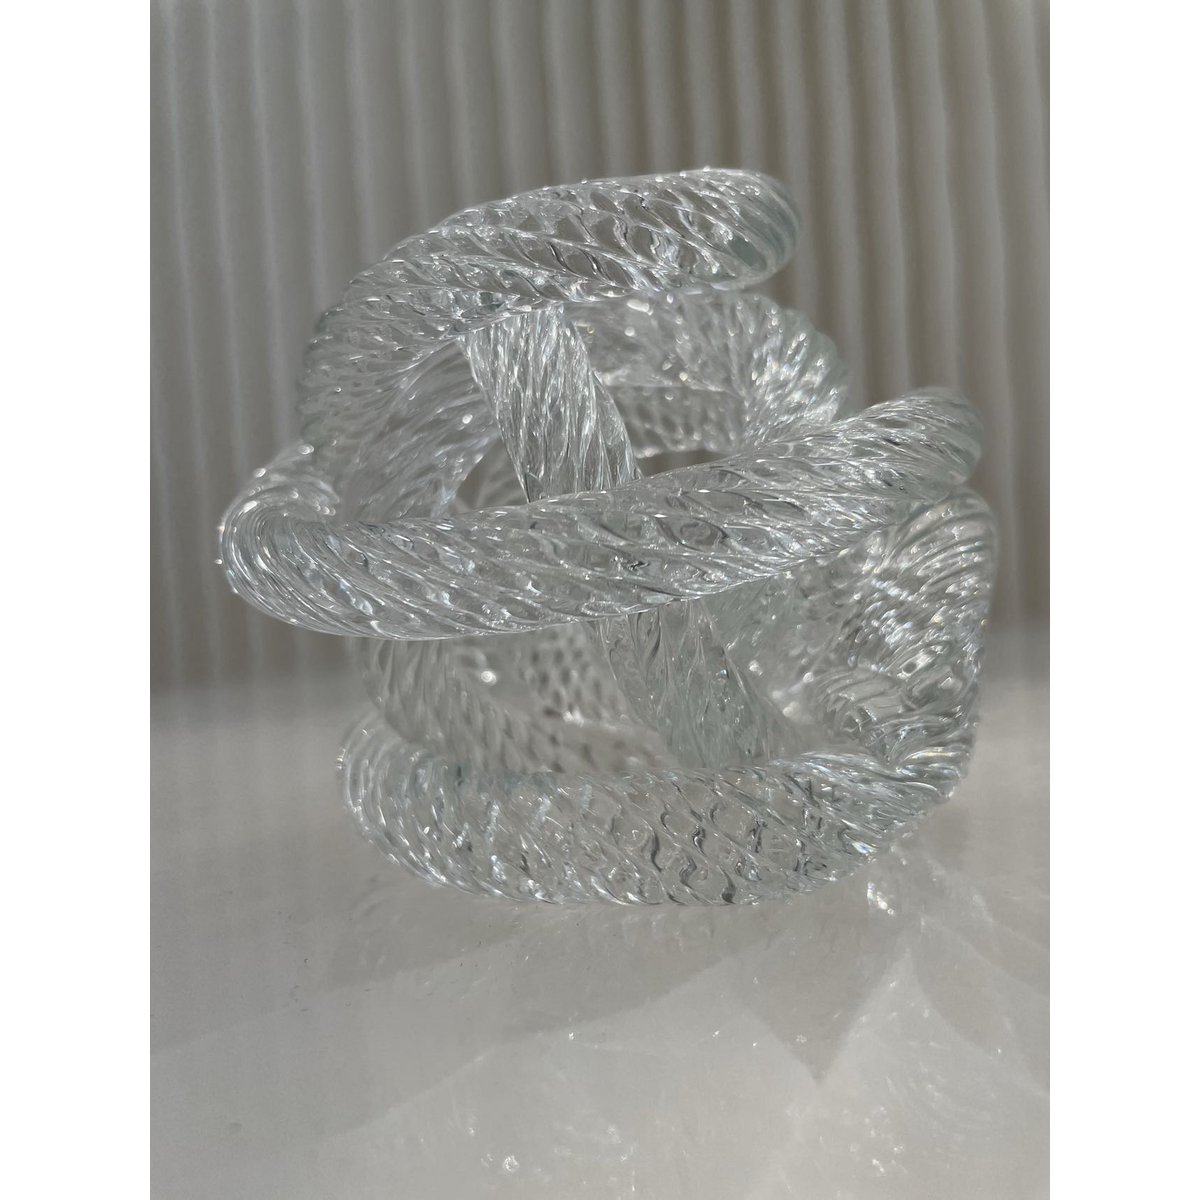 knotted glass sculpture - small - diameter 10cm